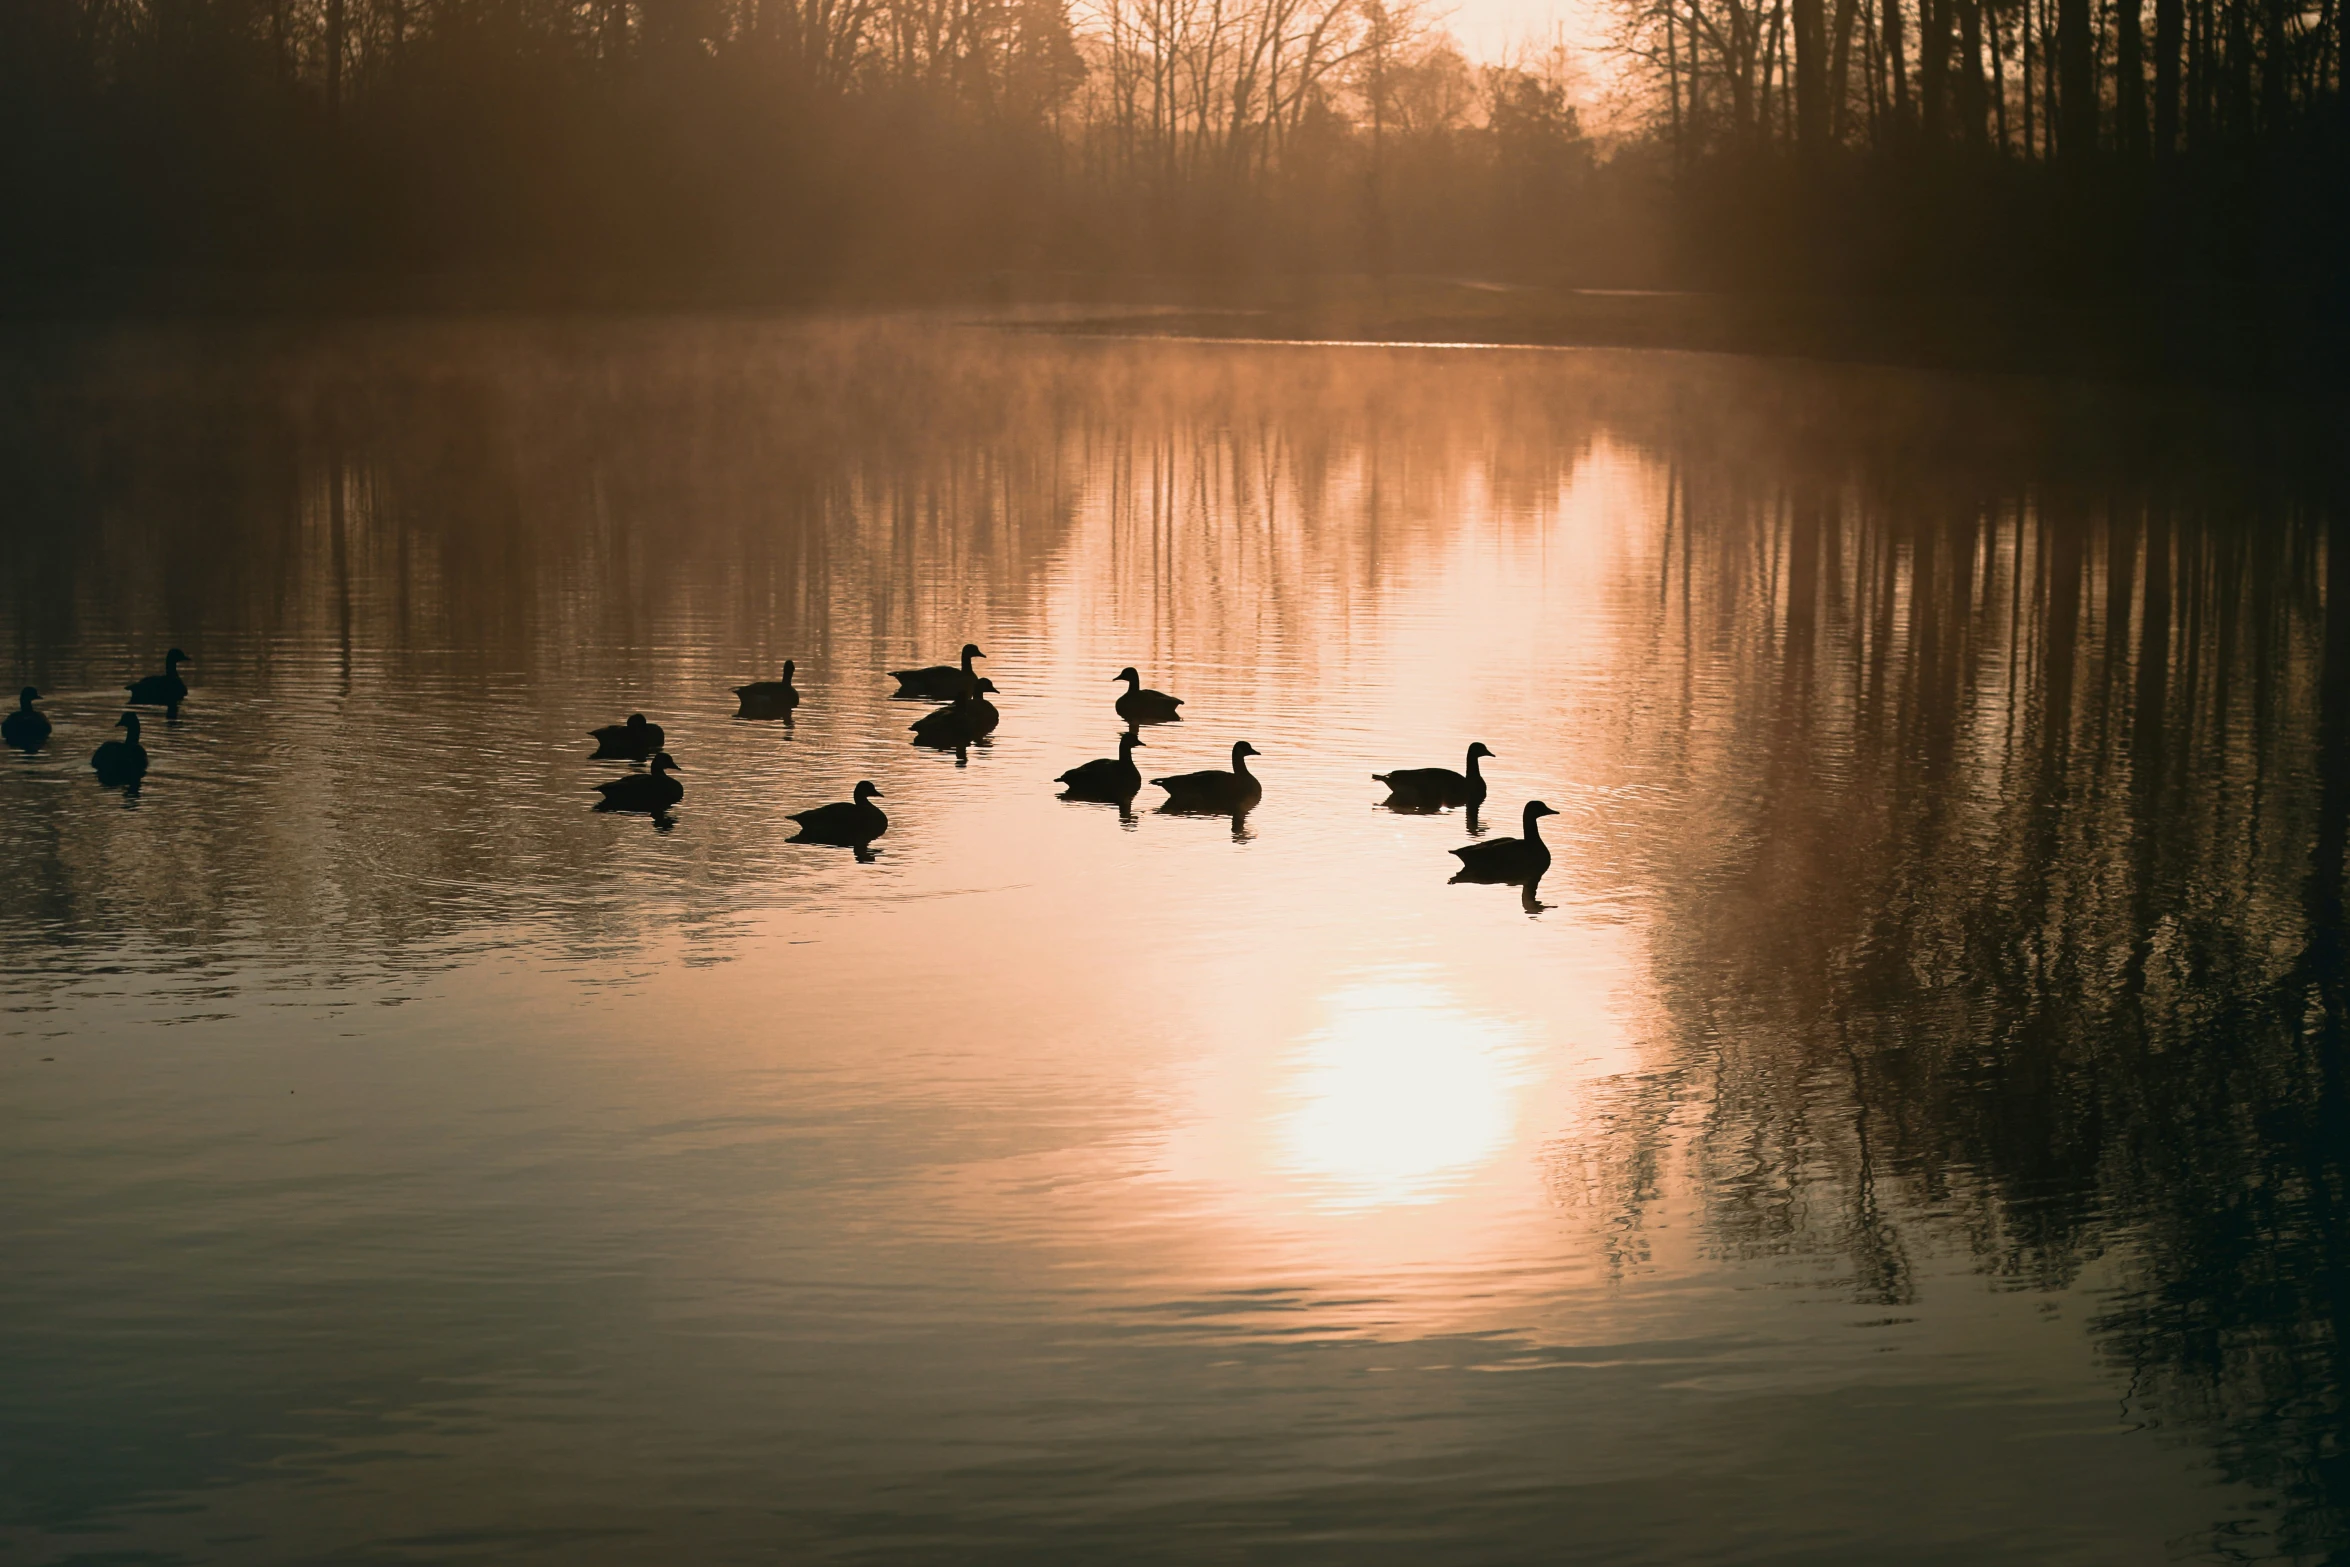 several ducks in the water as the sun is setting